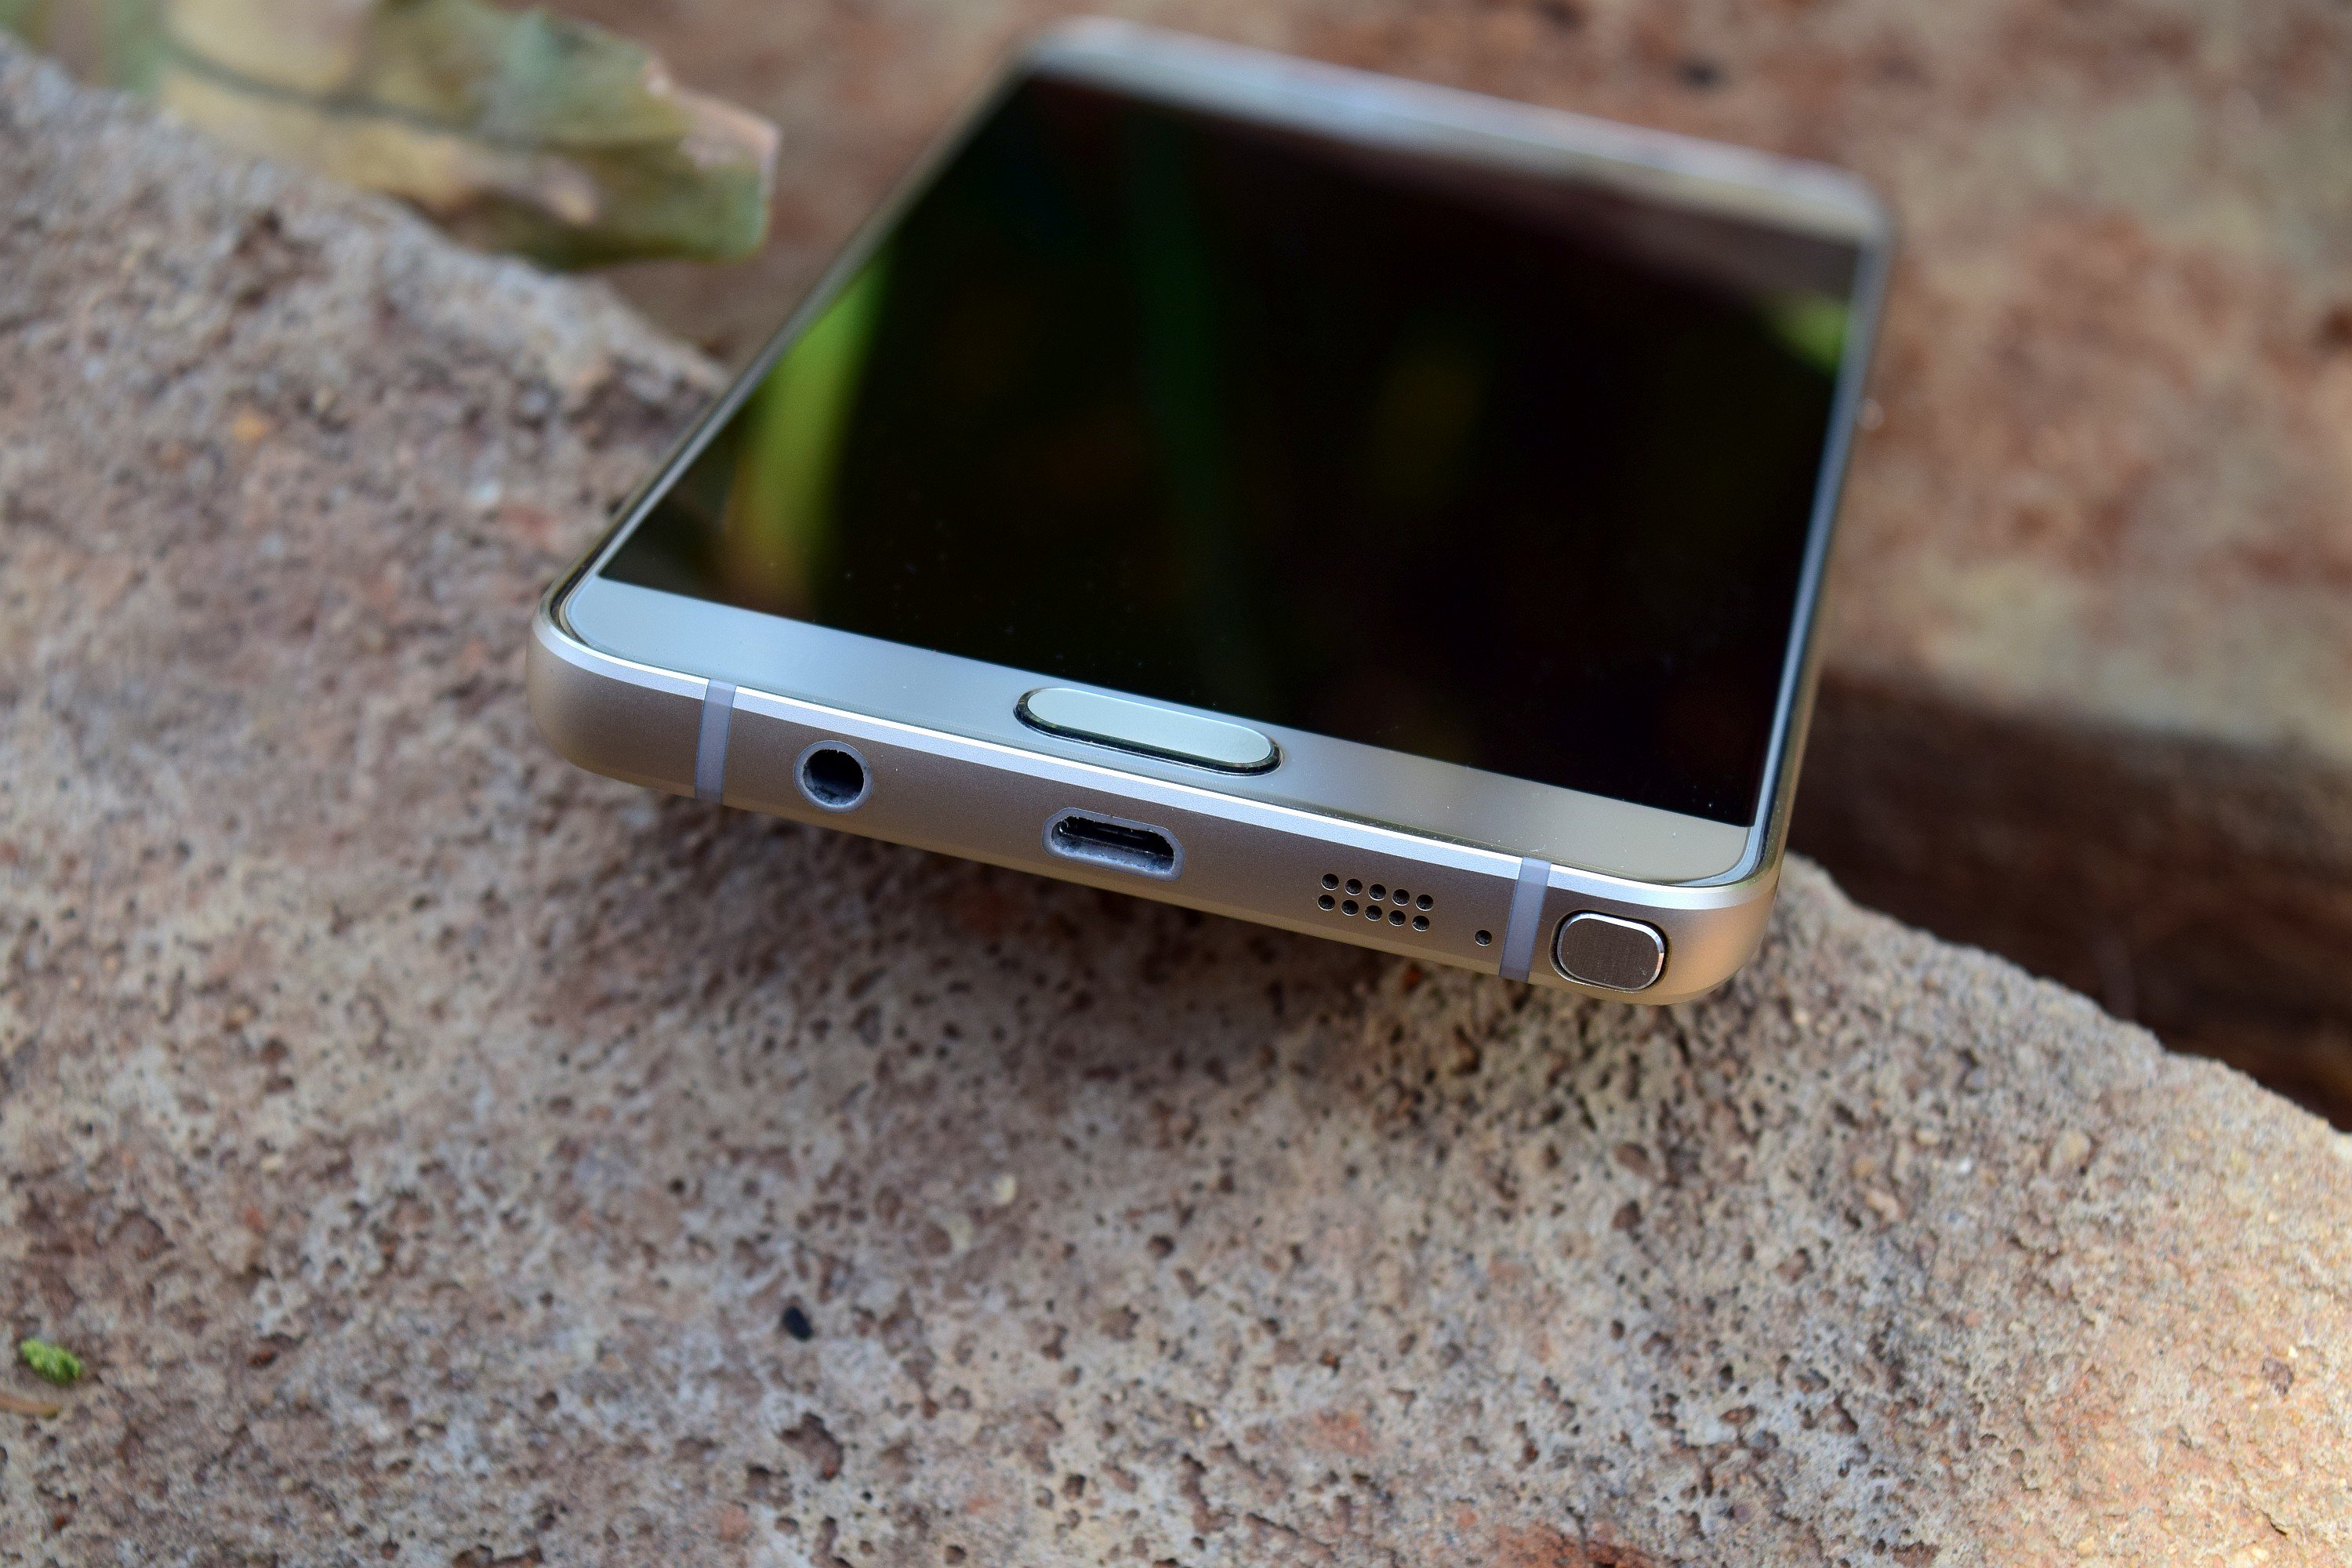 Exclusive: Samsung Galaxy Note 6 to come with USB Type-C, Gear VR incoming? - - SamMobile